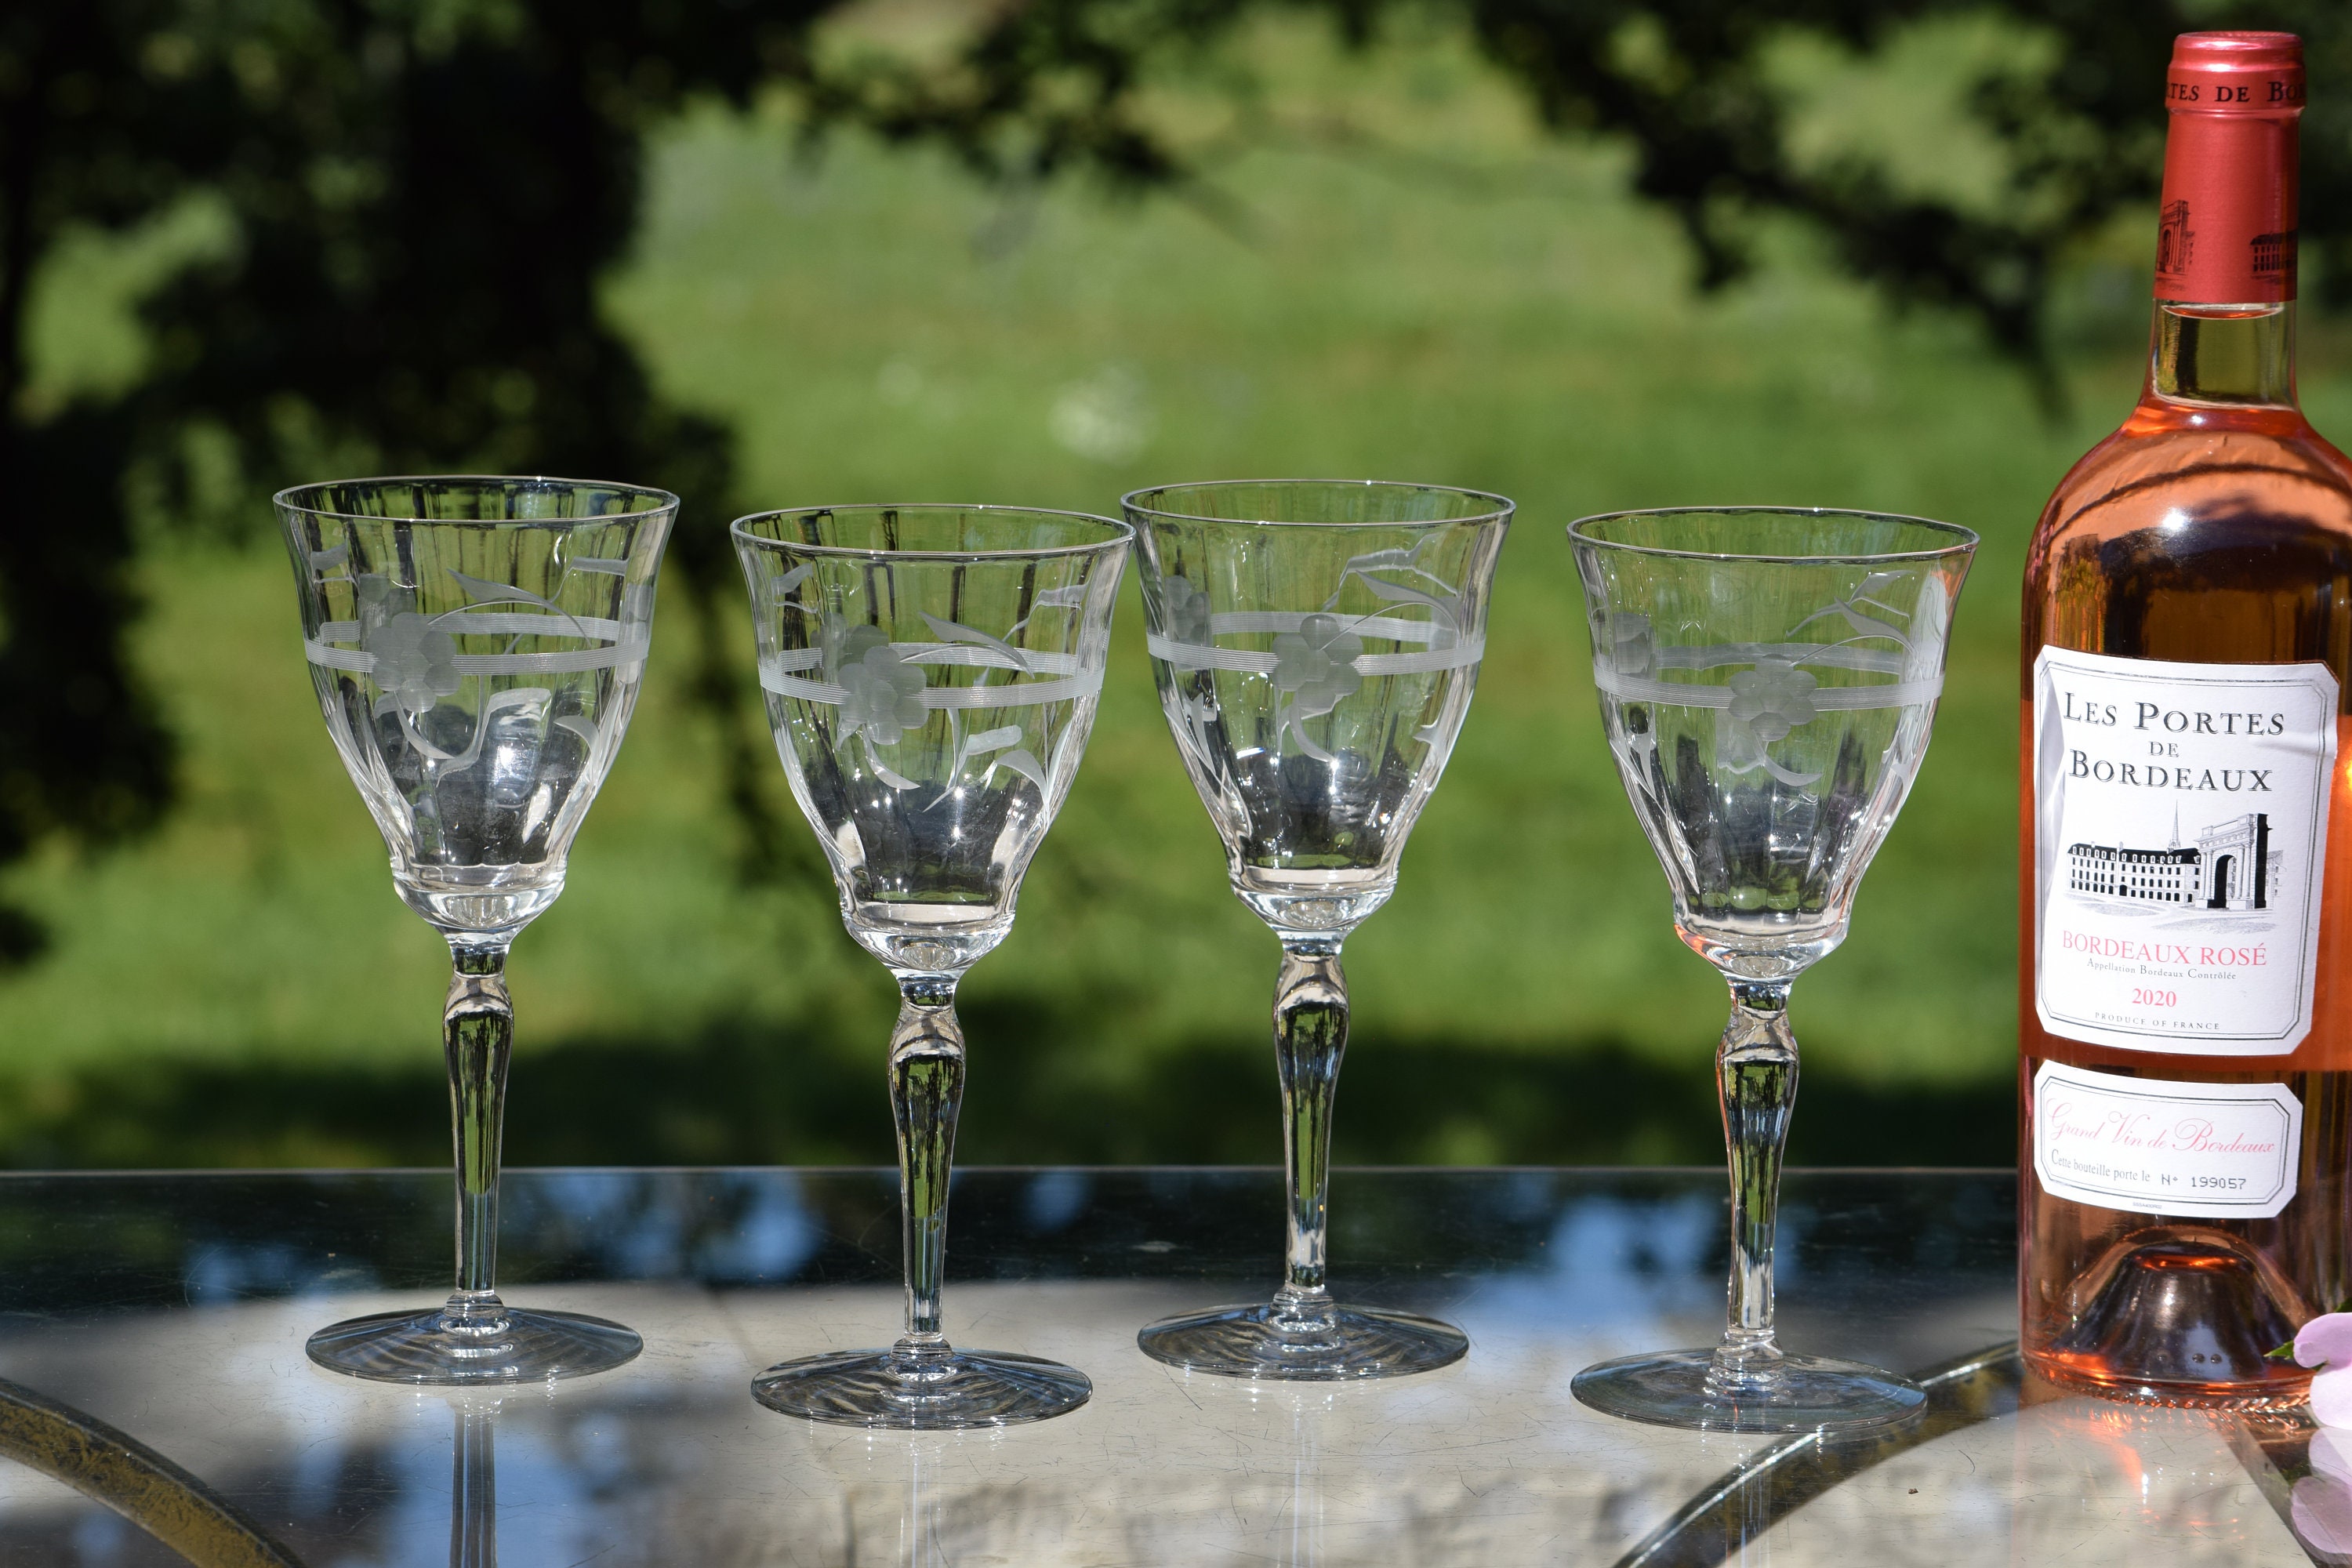 4 Vintage Etched Tall Wine Glasses ~ Water Goblets, 1950's Etched Wine  Glasses, Unique Etched Wine Glasses, Wedding Glasses